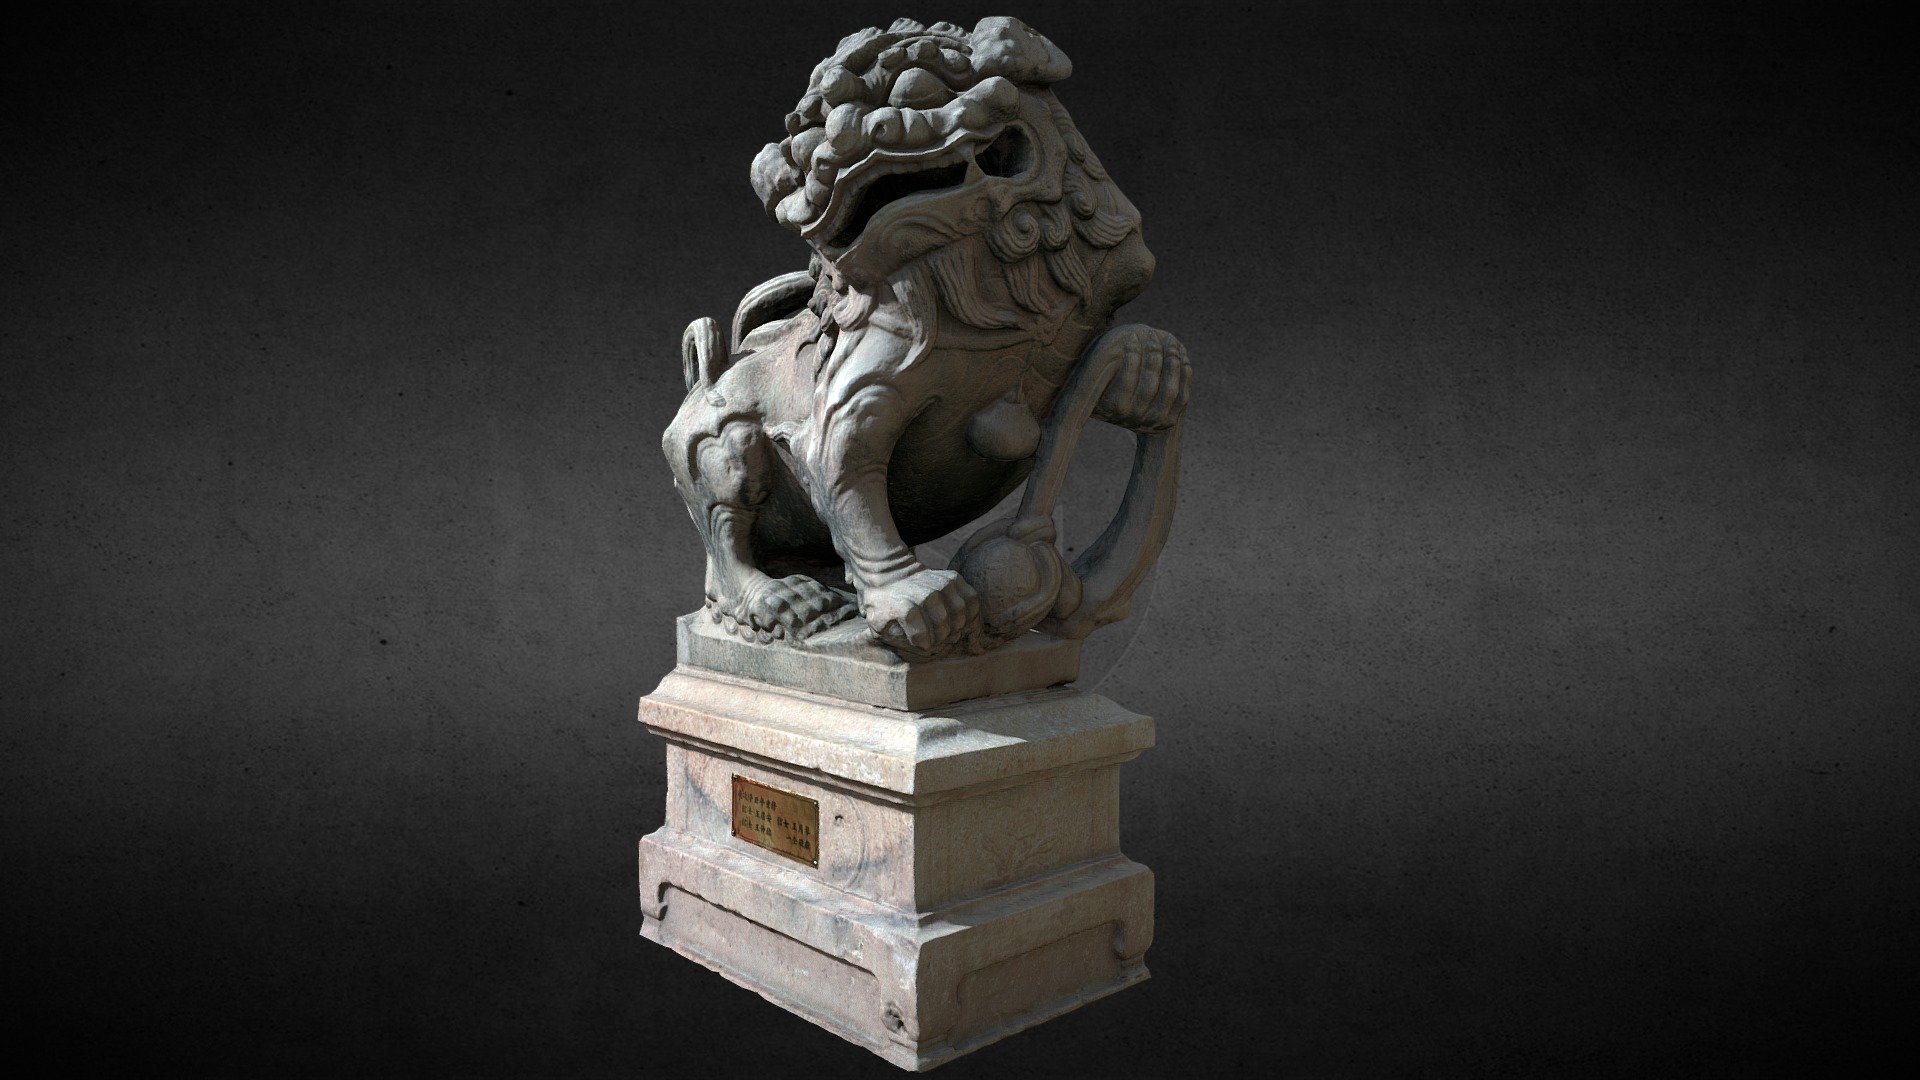 Lion-Statue-044M 旗津（旗後）天后宮 公獅

旗後天后宮傳創建於明鄭，經光緒十三年（1887）、昭和元年（1926）、民國三十七年等多次修建。
門前一對石獅，公開母闔嘴，肩頭、指爪等塊頭皆分明剛壯，並藉由扭擺的頭部與前足一高一低的架勢，乃至矮壯的身形，呈現出極具壓迫感的張力。

節自《臺灣石獅圖錄》陳磅礴著



Lion-statue-044M

Polys: 35488
Verts: 17732

Lion-statue-044M 3D Model. Model created with Photogrammetry and completed in 3ds Max.
Model used normal map for details. This model contains 35488 Triangles

Textures:

044M-AO.png—8192x8192(Ambient occlusion map)

044M-D.png—8192x8192(Diffuse map)

044M-N.png—8192x8192(Normals map)

044M-Metal—8192x8192(Metalness map)

044M-Rough.png—8192x8192(Roughness map) - Lion-Statue-044M 旗津天后宮 - Buy Royalty Free 3D model by Kevin Lai 賴昊君 (@HaoJunLai) 3d model